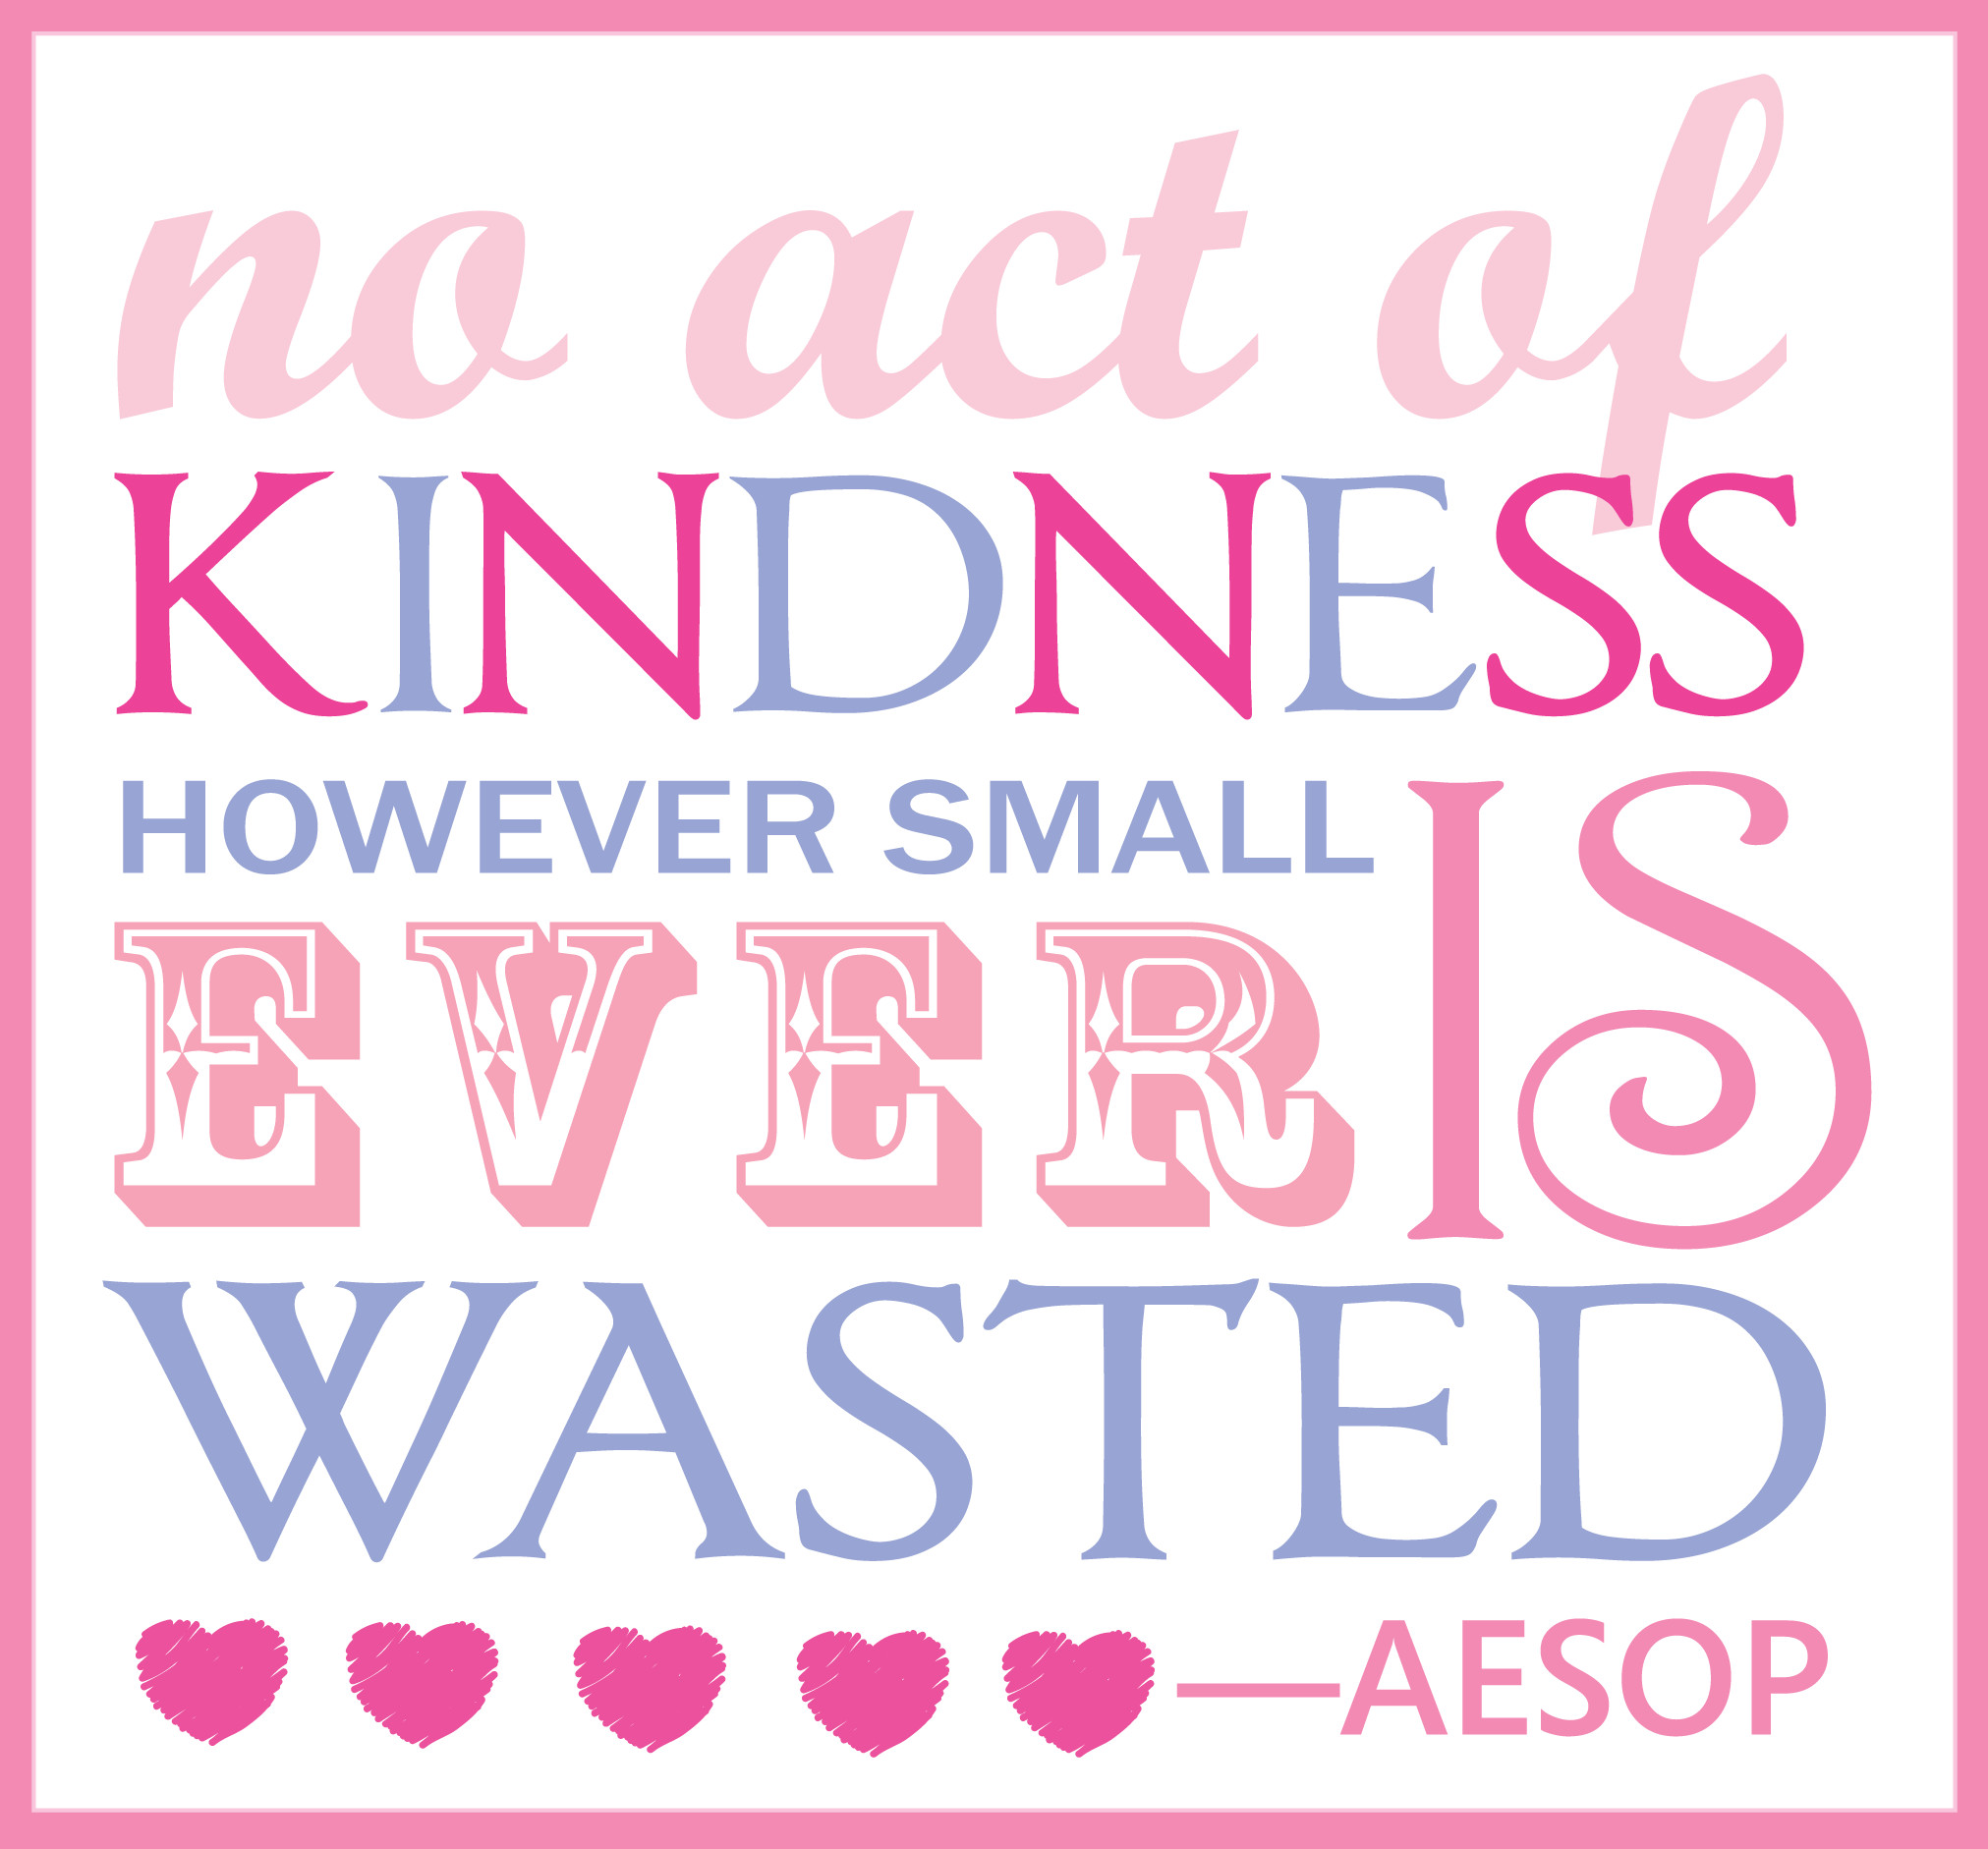 Acts Of Kindness Quotes
 10 Random Acts of Kindness